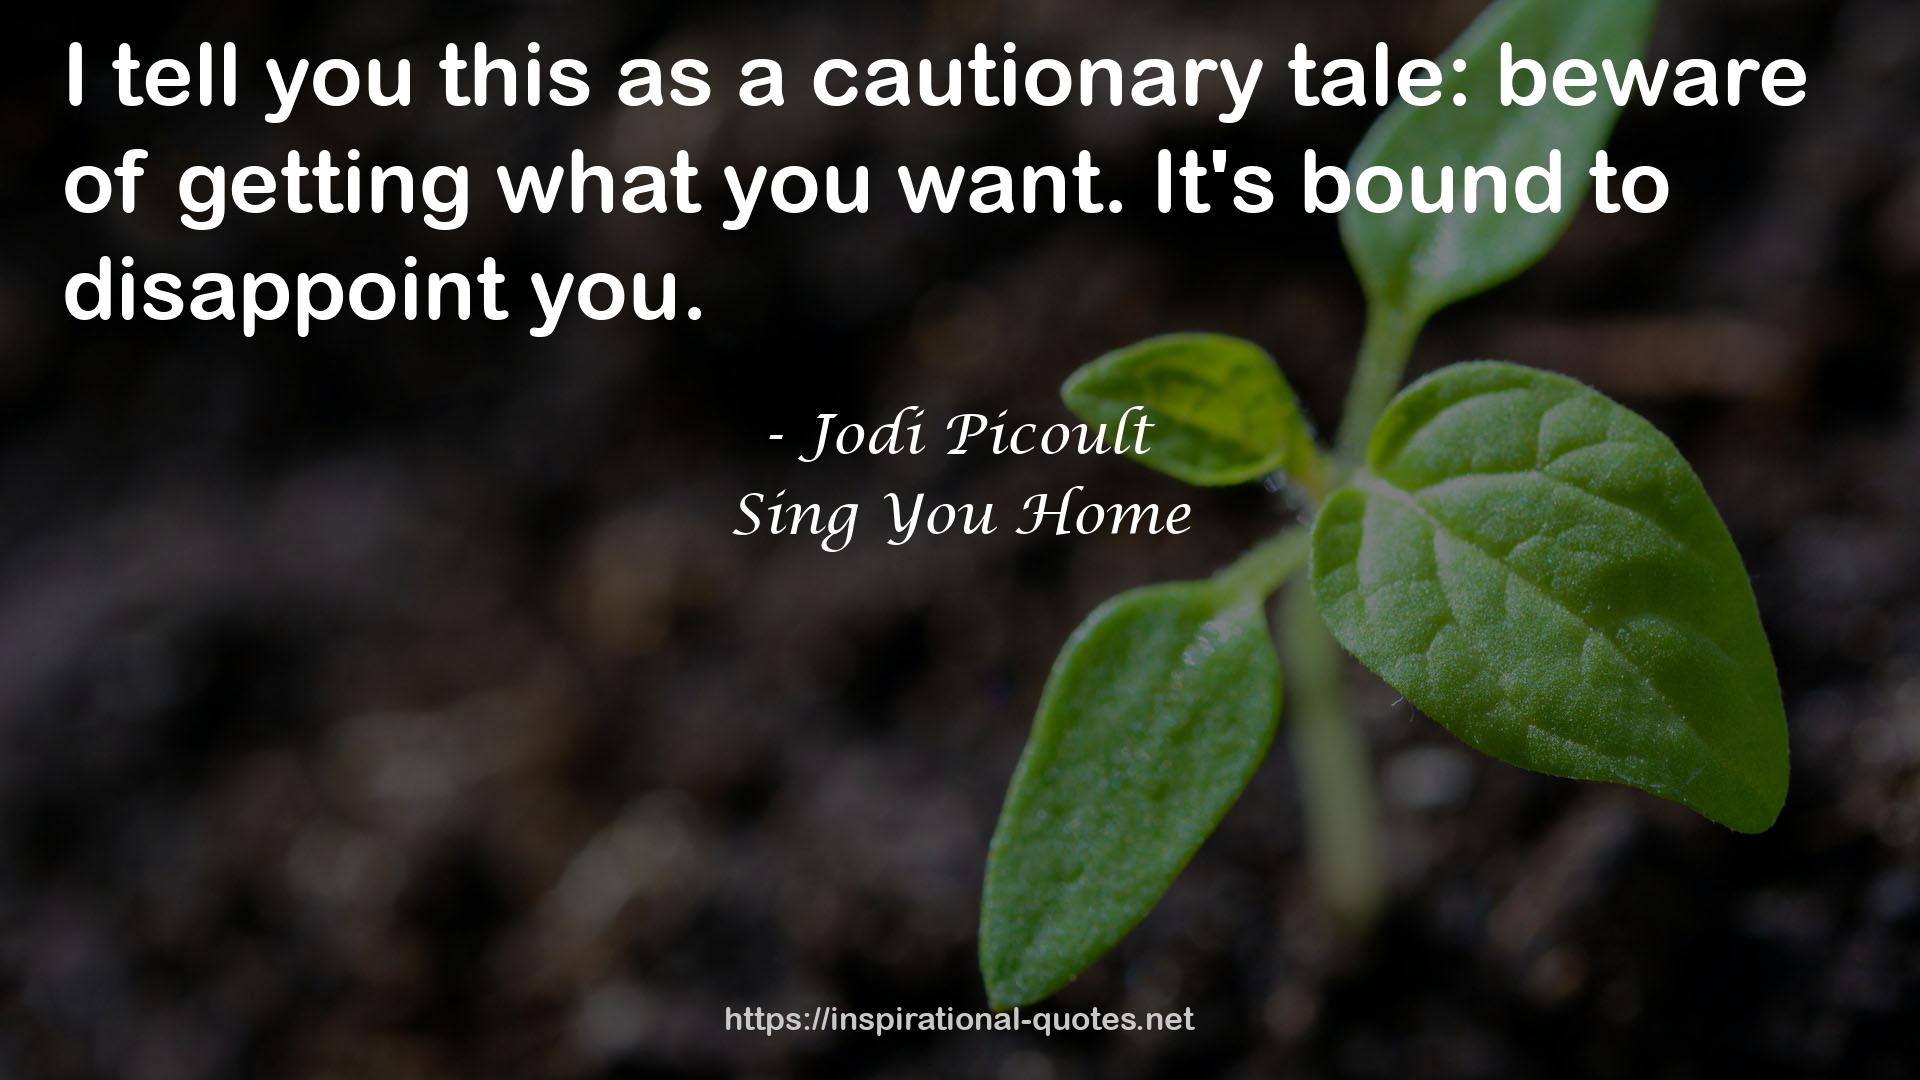 Sing You Home QUOTES